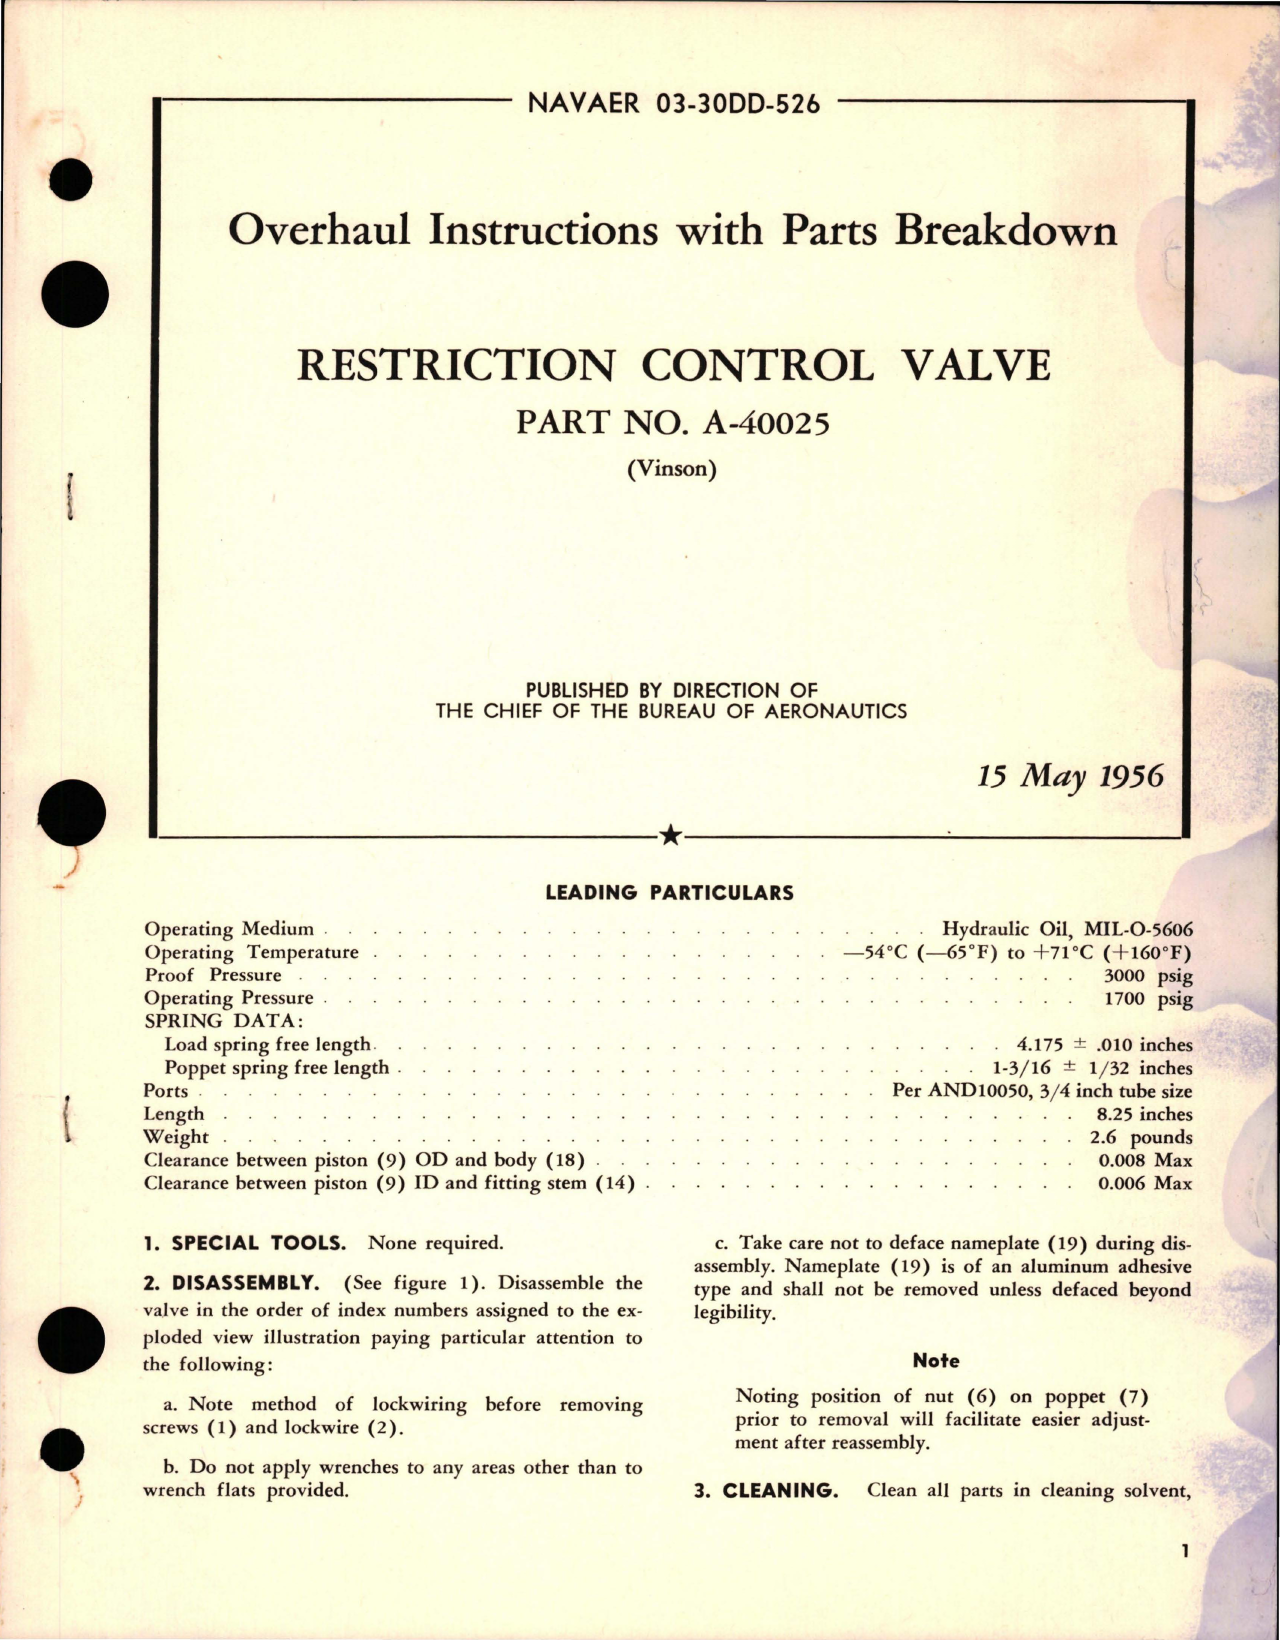 Sample page 1 from AirCorps Library document: Overhaul Instructions with Parts Breakdown for Restriction Control Valve - Part A-40025